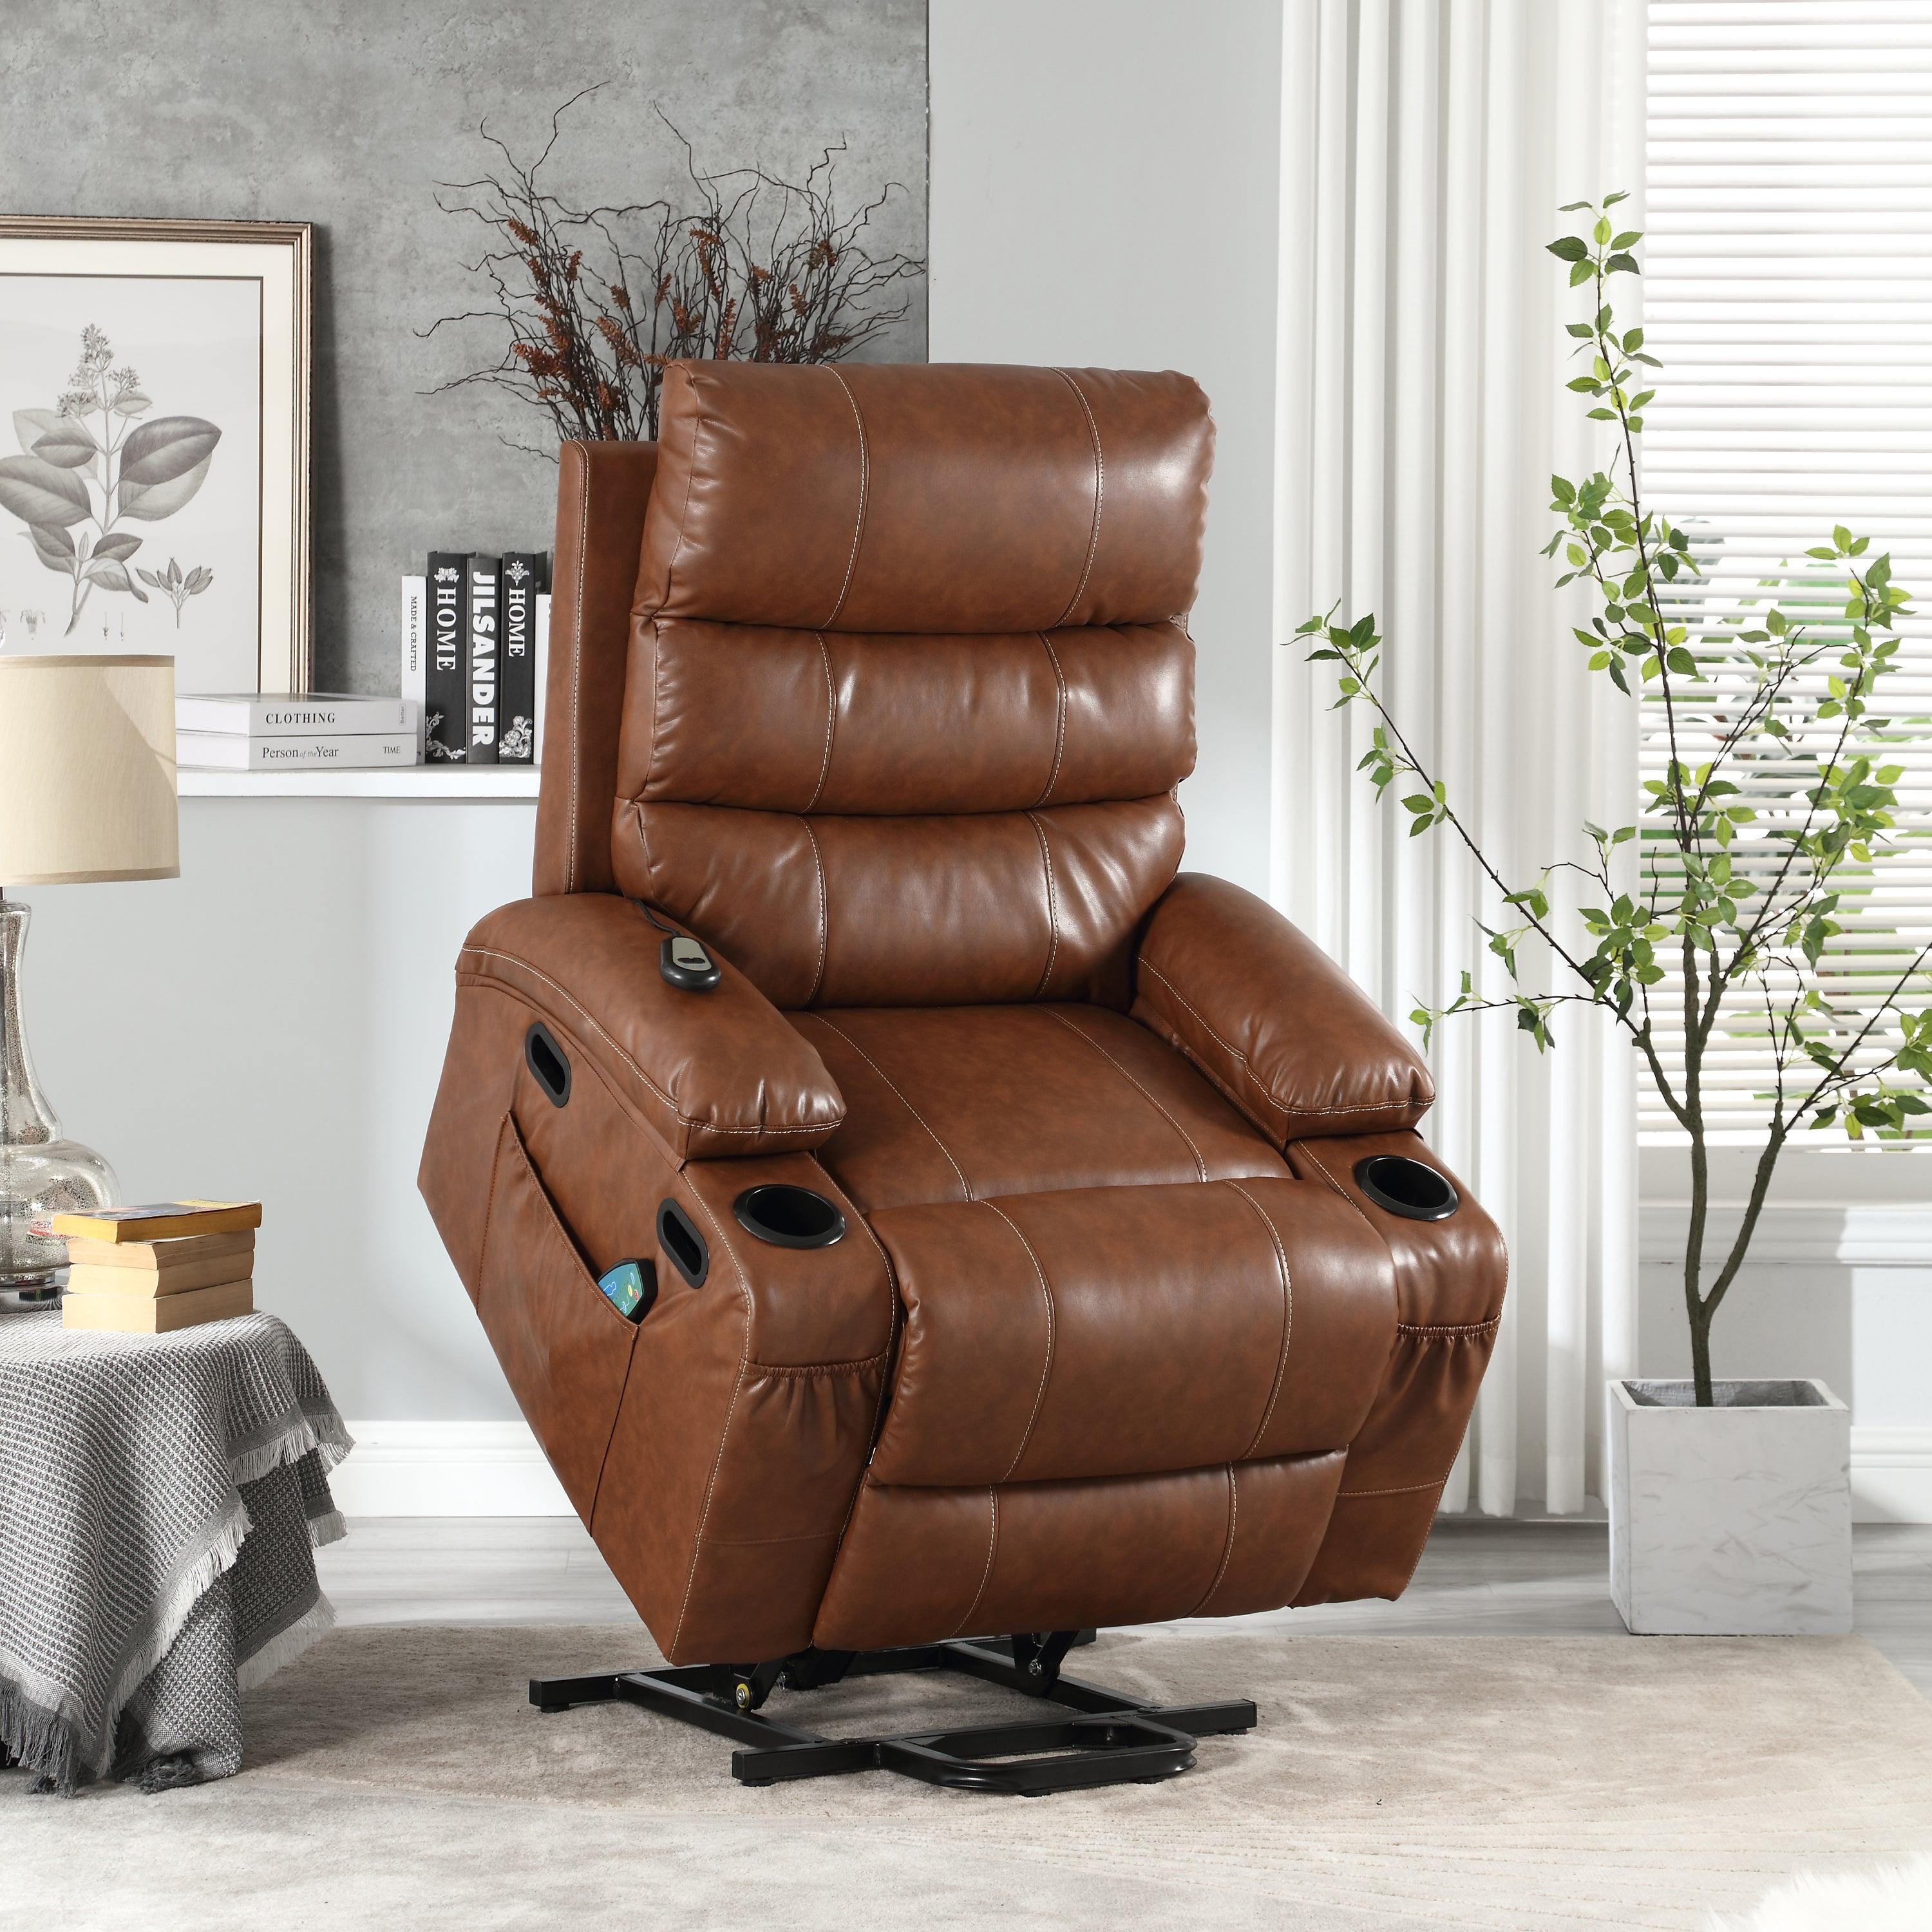 🆓🚛 21" Seat Width Electric Power Lift Recliner Chair Sofa for Elderly, 8 Point Vibration Massage & Lumber Heat, Remote Control, Side Pockets & Cup Holders, Brown